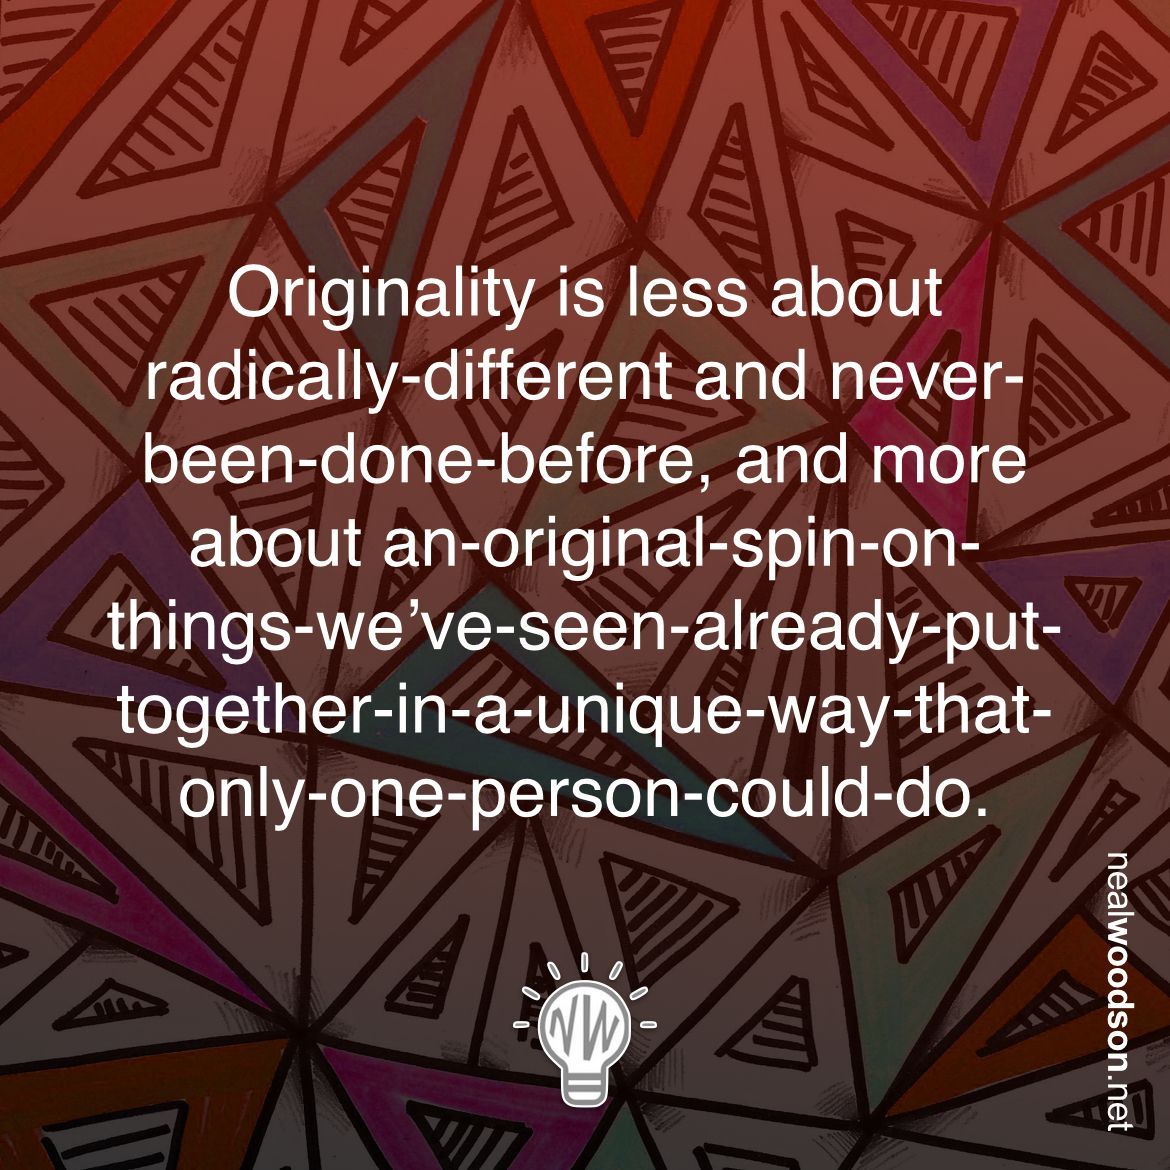 Originality is less about radically-different and never-been-done-before, and more about an-original-spin-on-things-we’ve-seen-already-put-together-in-a-unique-way-that-only-one-person-could-do. 
#art #originality #humanexperience